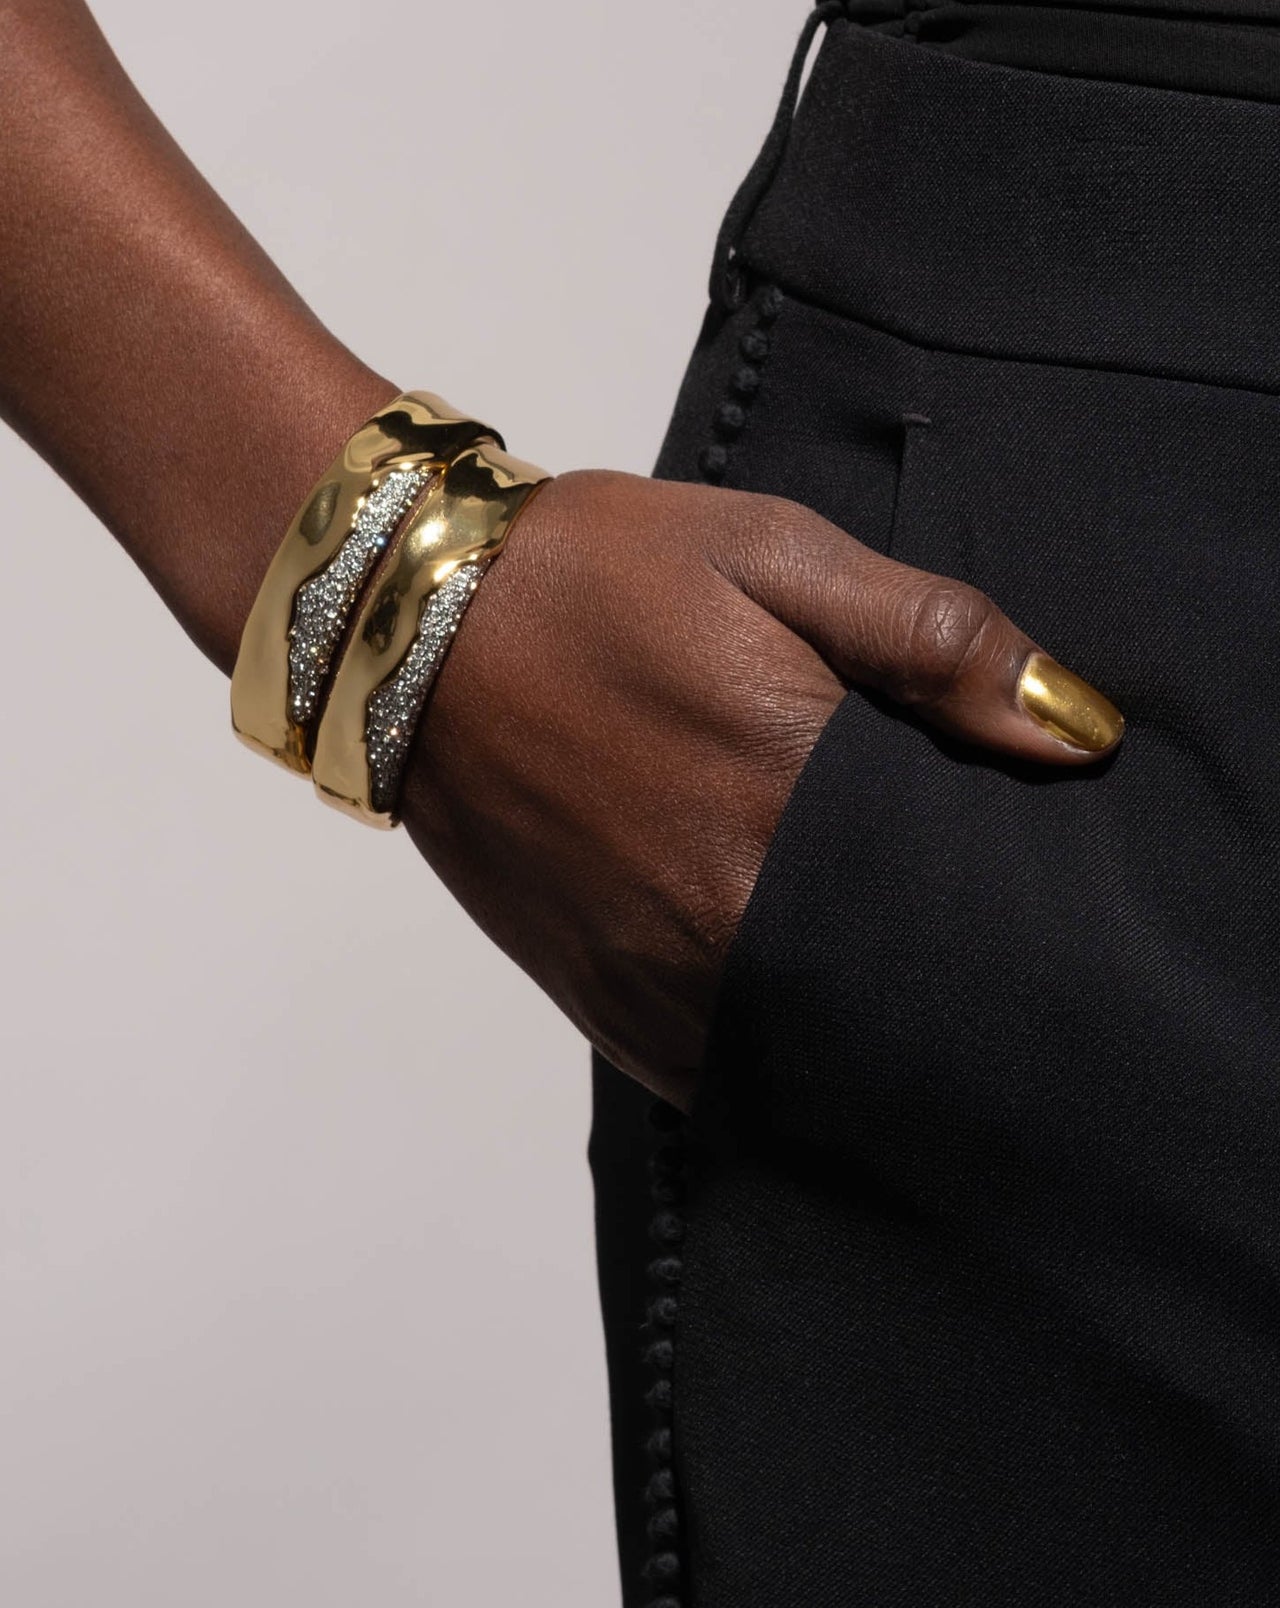 Solanales Gold Crystal Cuff Bracelet - Photo 2